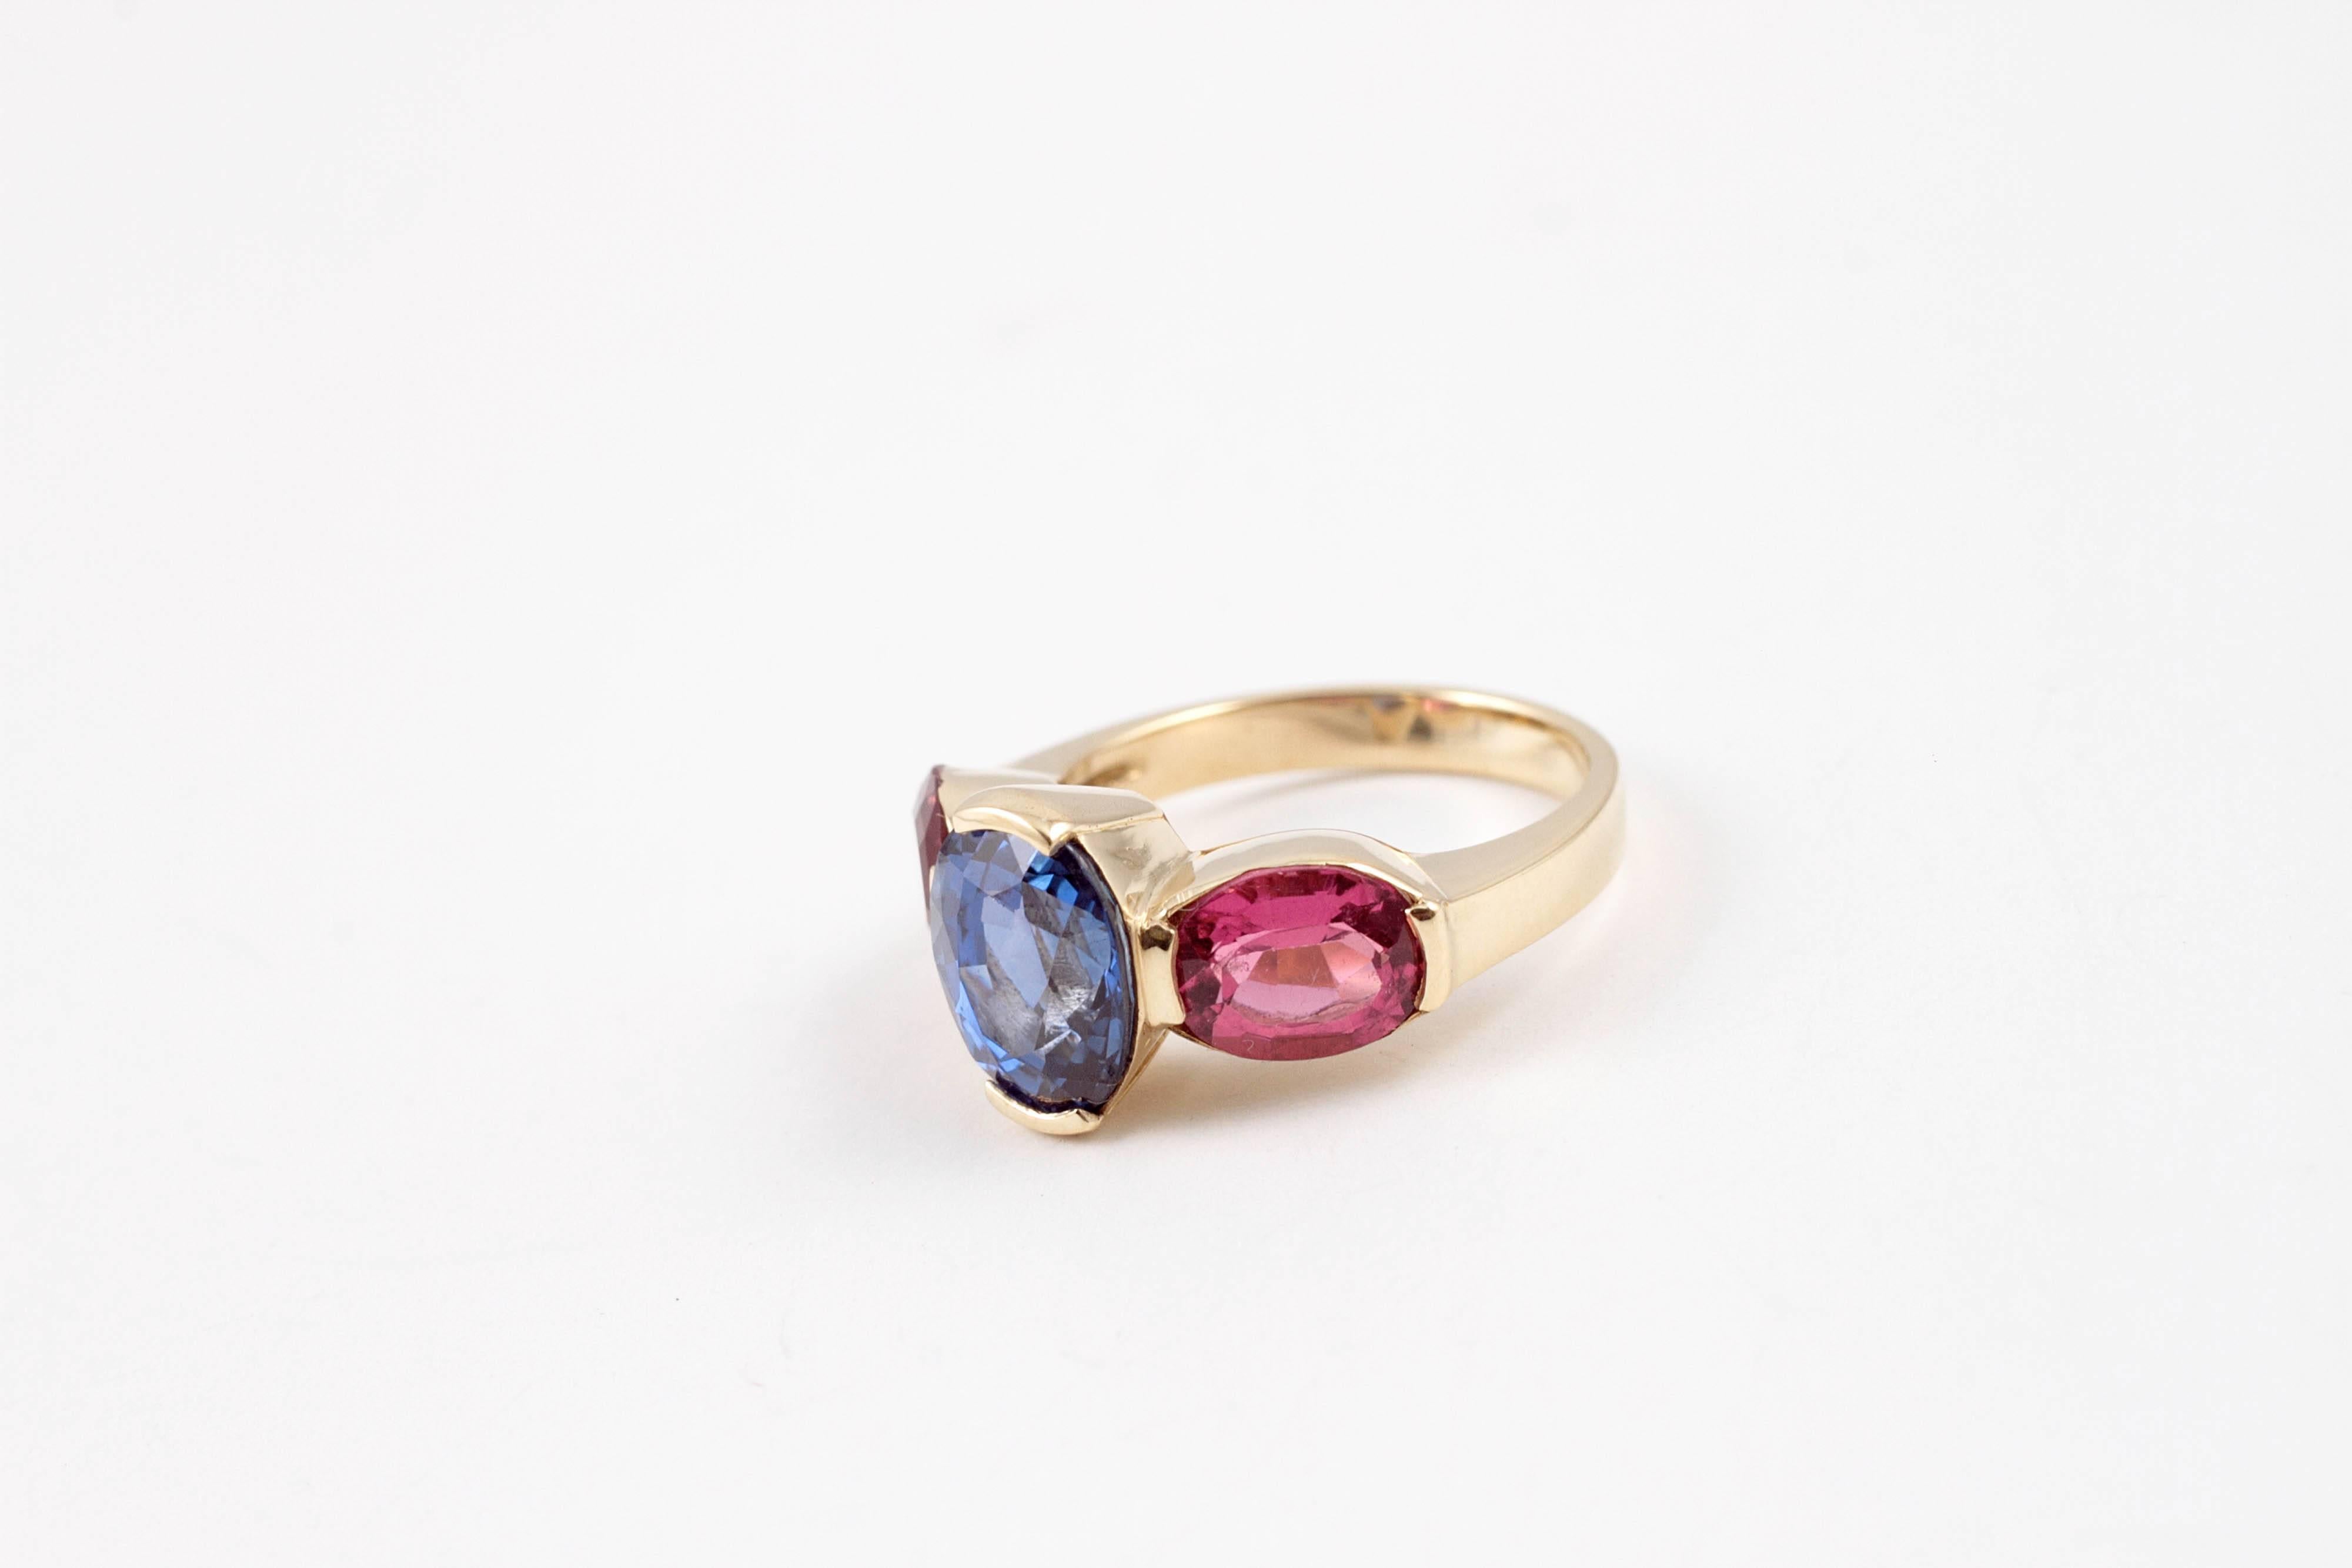 If you love bright colors - this is your ring!  In a size 5, composed of 18 karat yellow gold, the 3.00 carat blue sapphire is flanked by bright pink, oval-shaped pink tourmaline stones.  